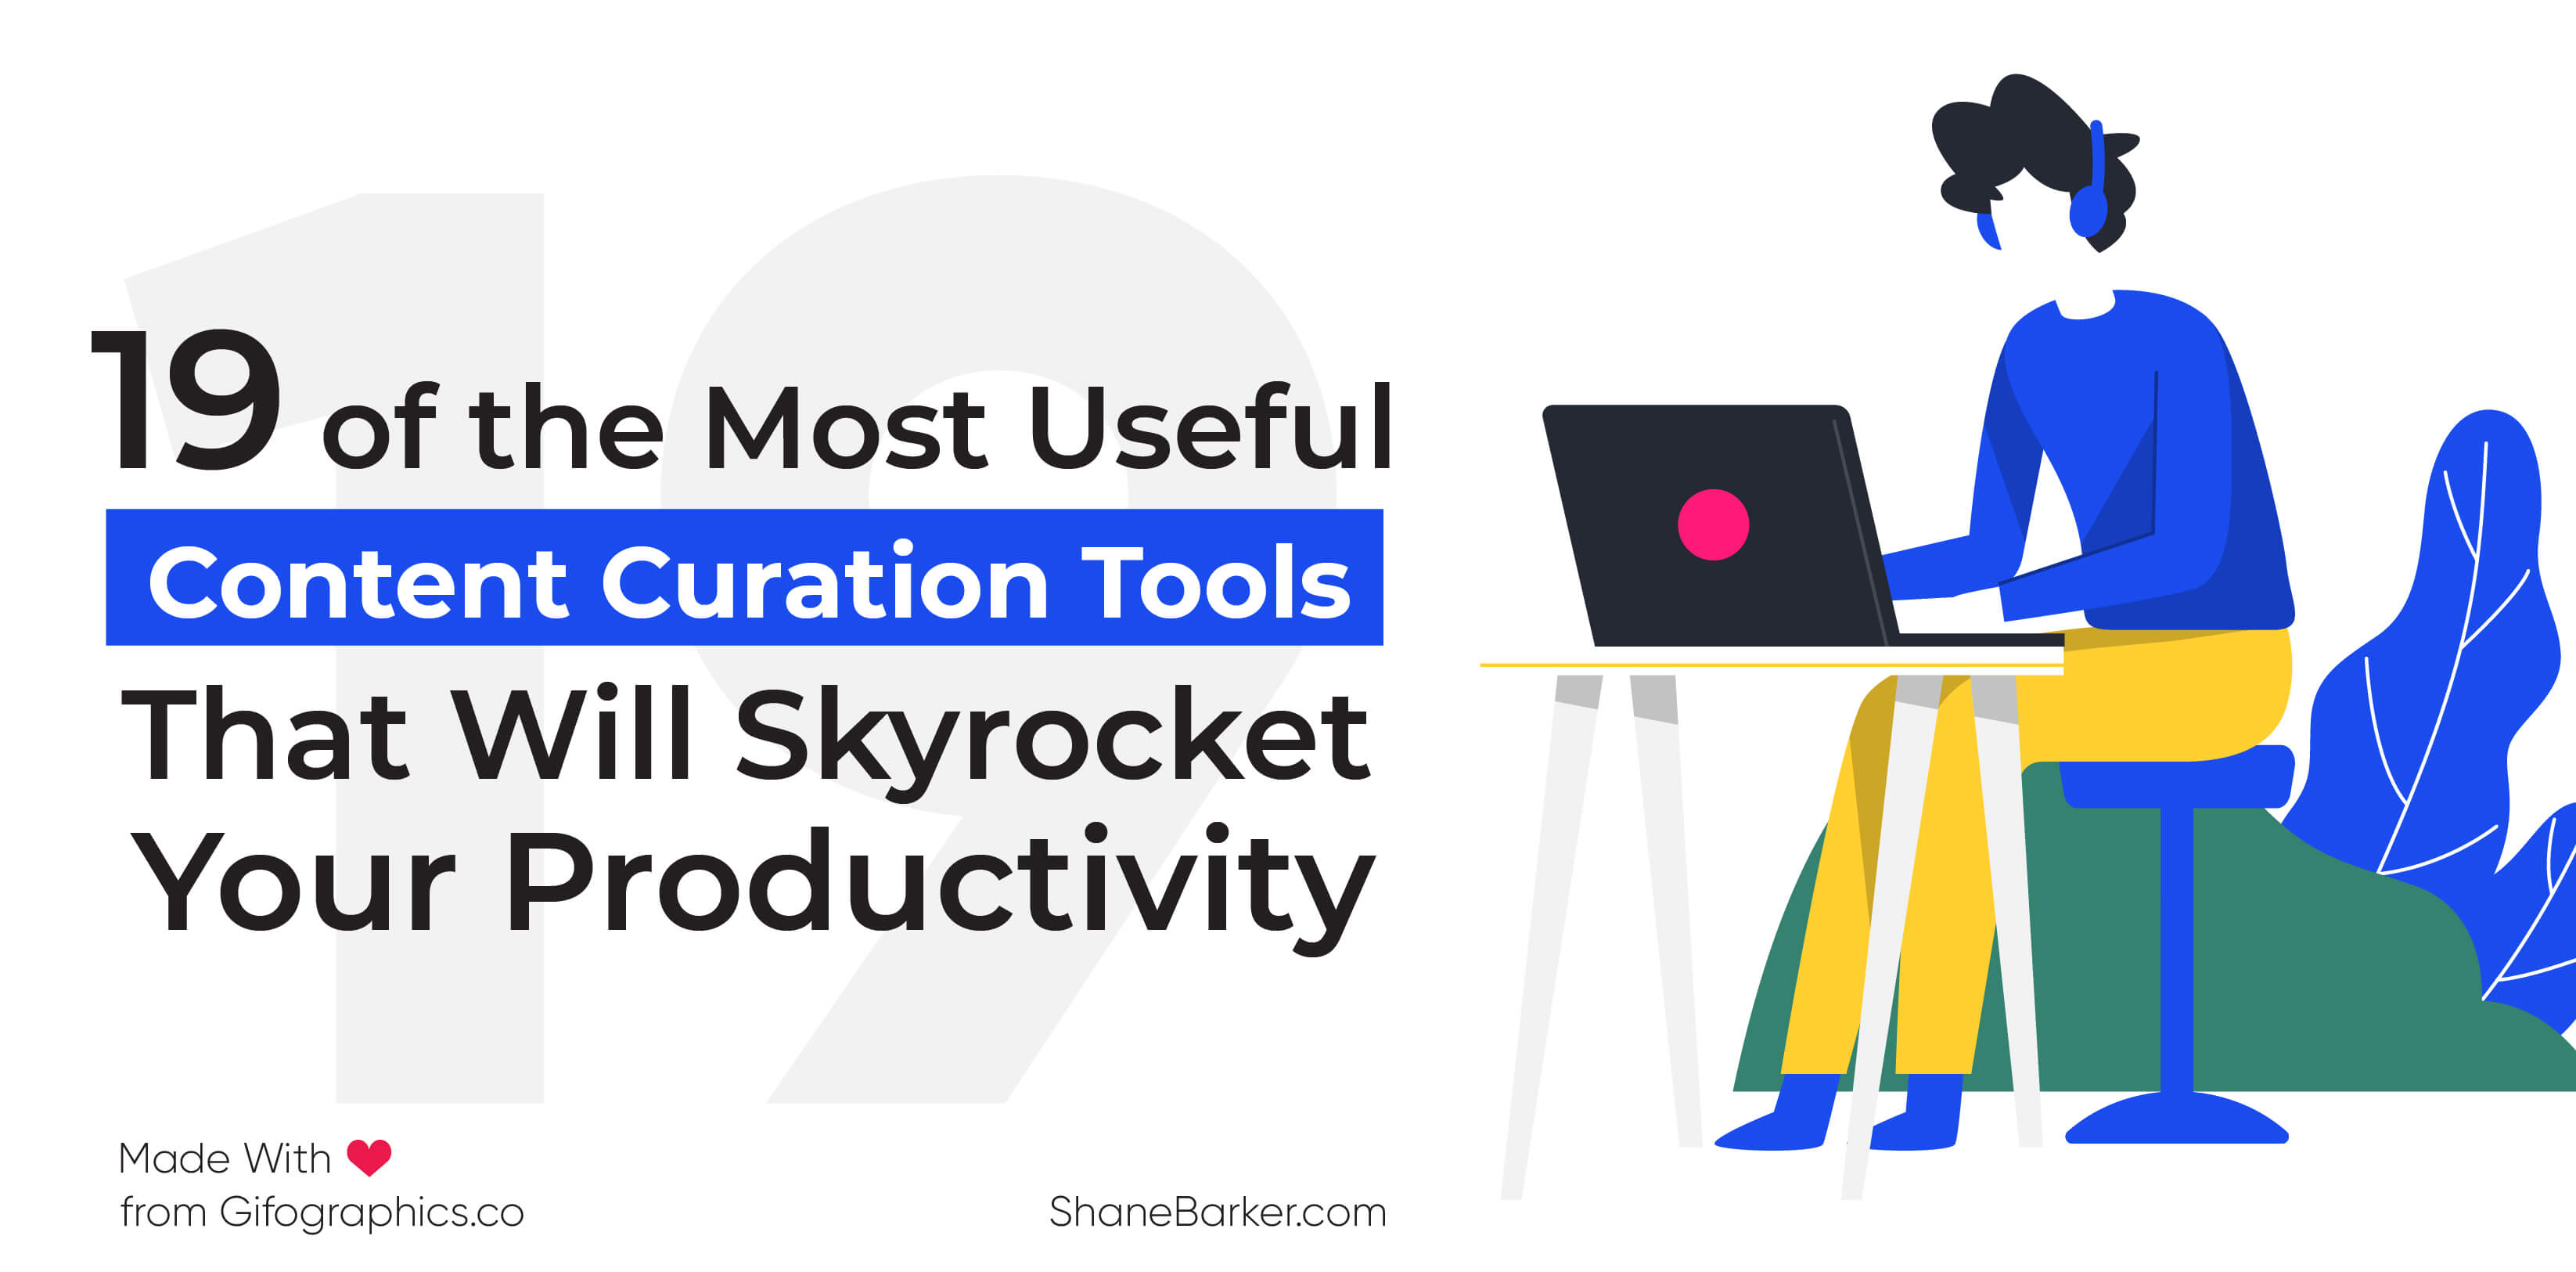 19 of the most useful content curation tools that will skyrocket your productivity